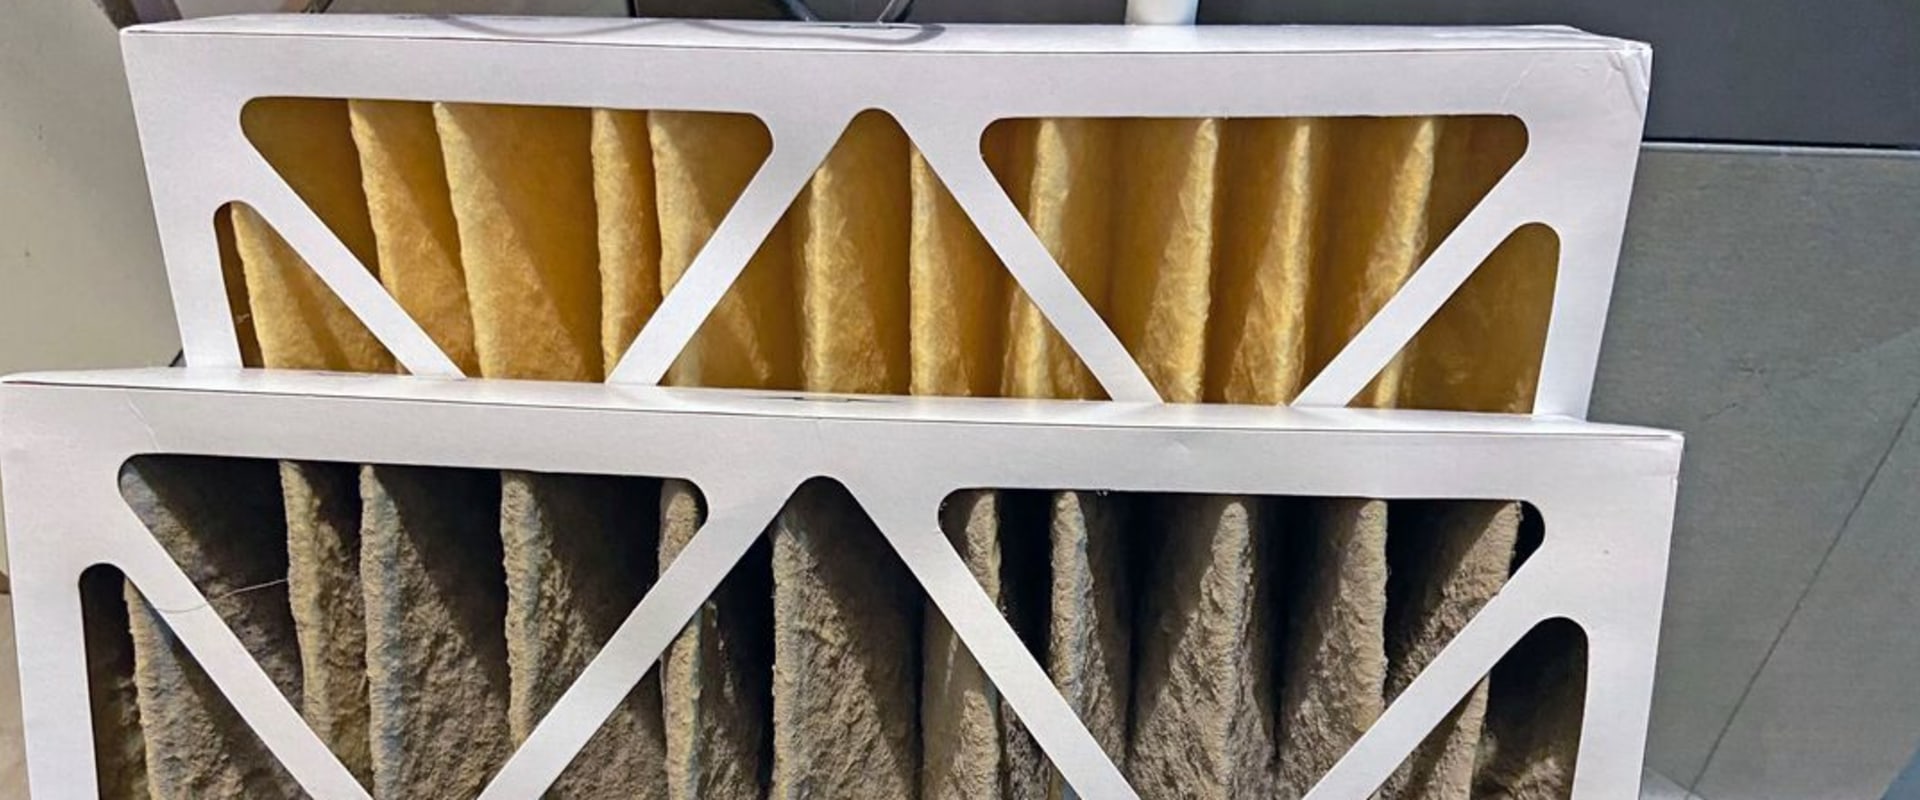 How Often Should You Change Your 20x25x1 Air Filter?